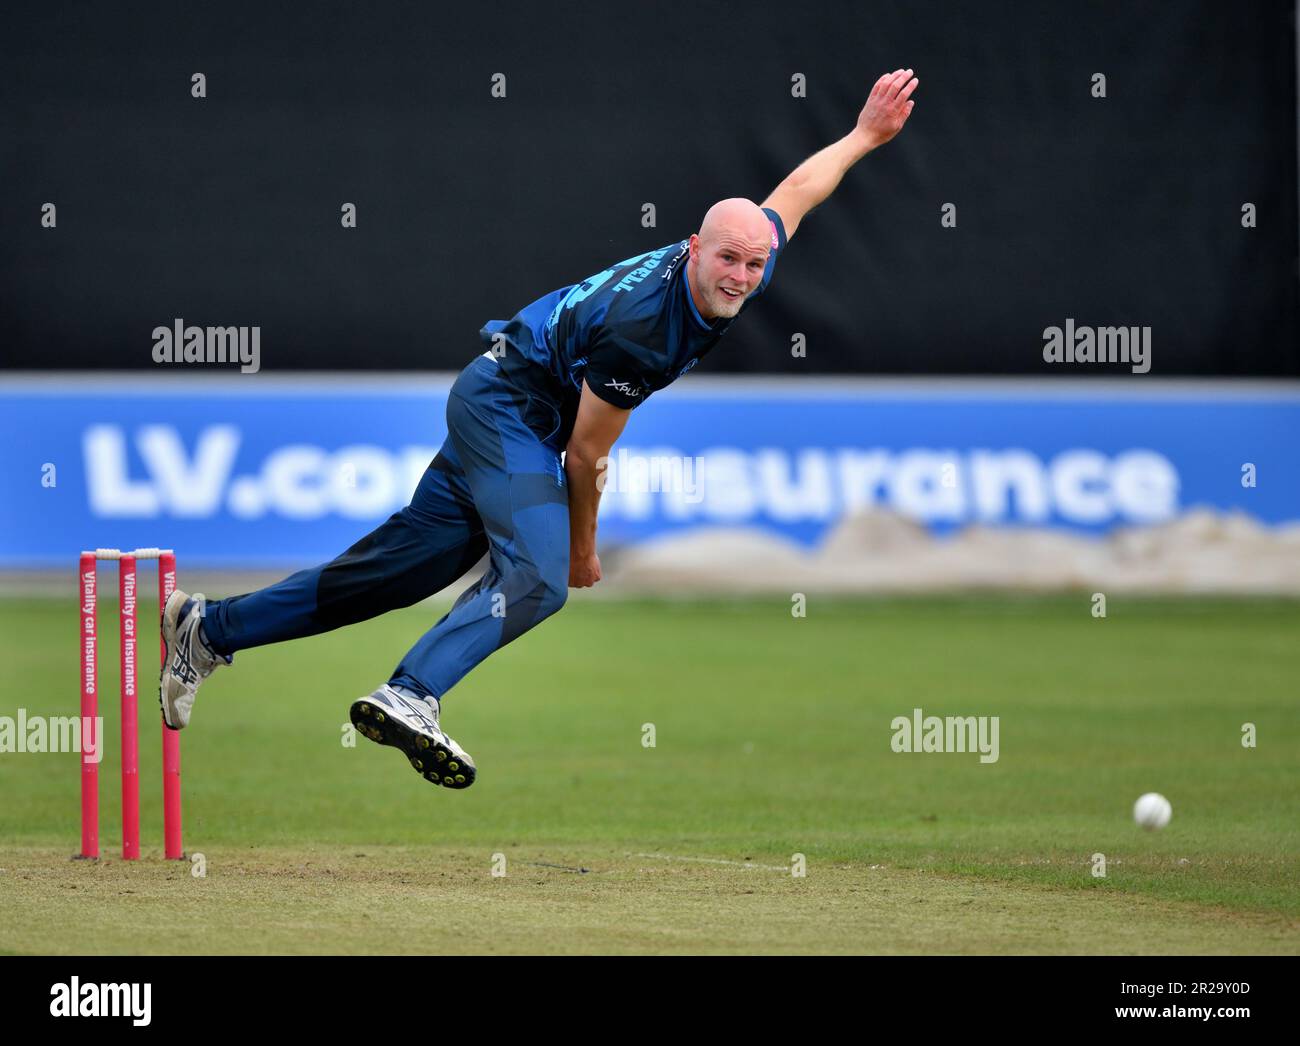 Derbyshire's Zak Chappell bowling during a Second XI T20 match against Nottinghamshire. Stock Photo